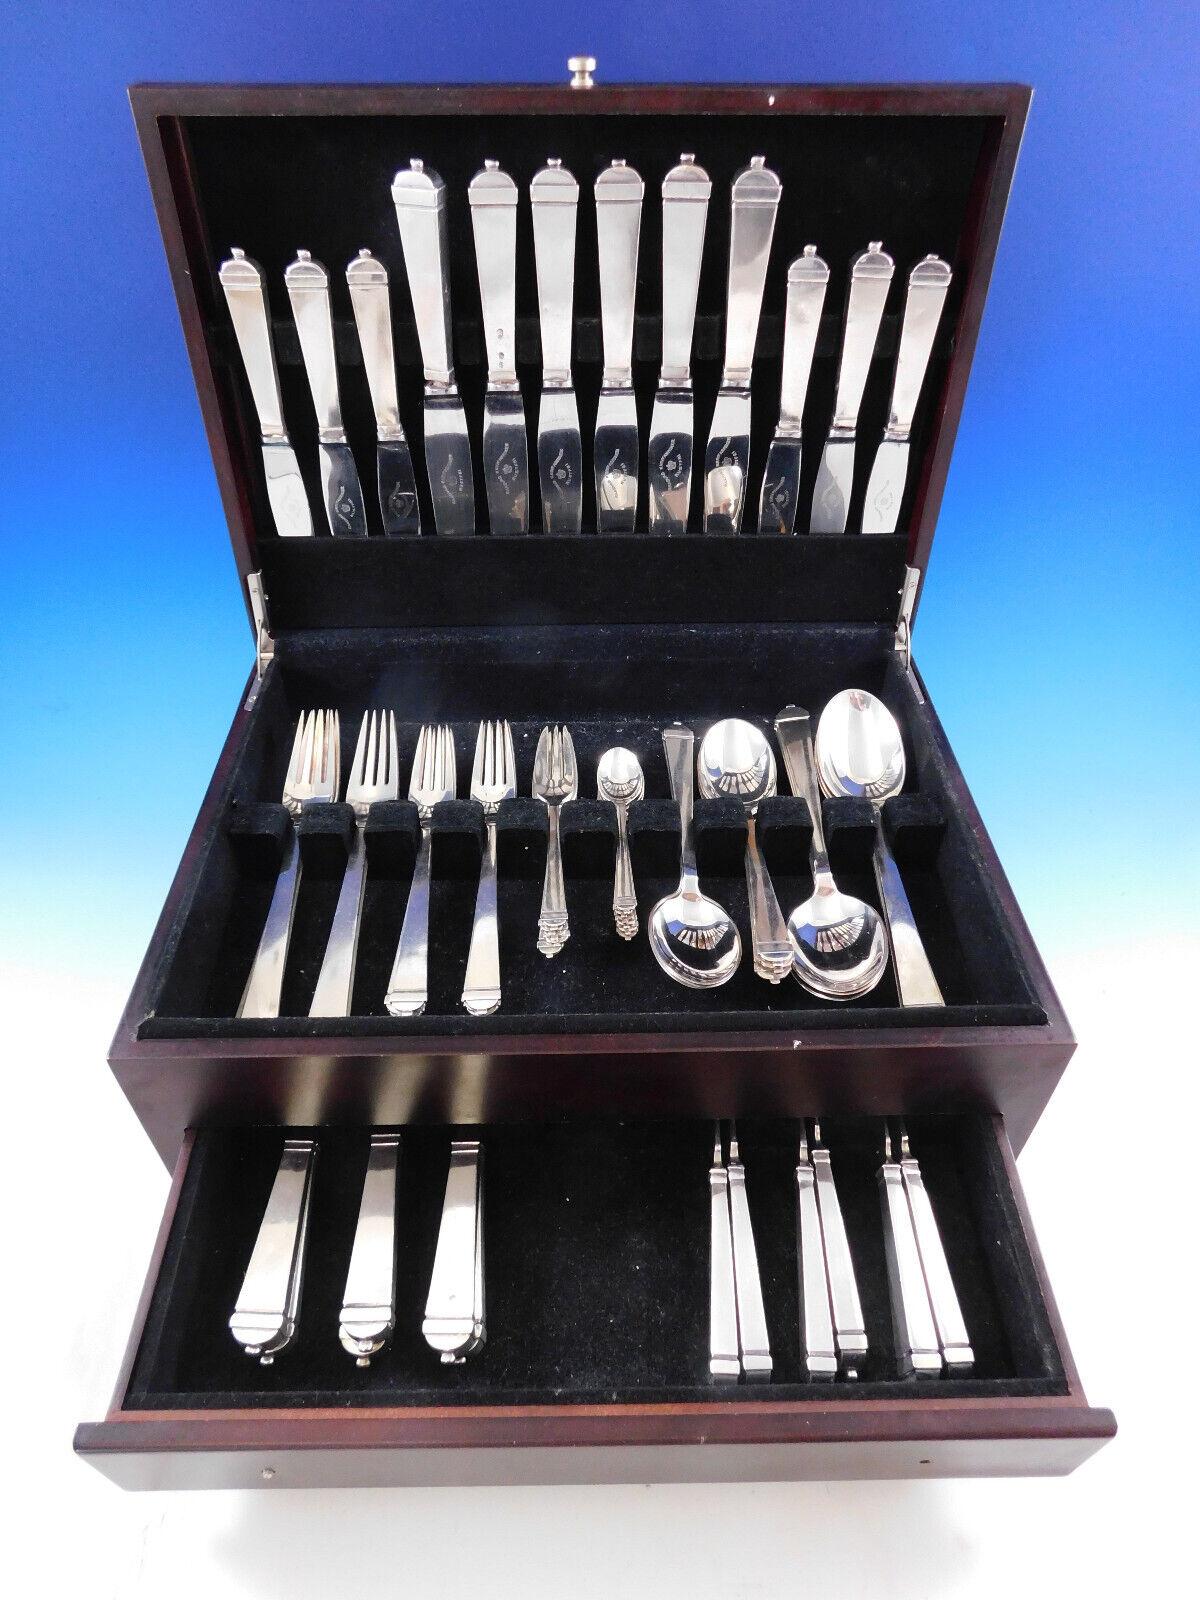 S. Christian Fogh, a Danish silversmith, operated a workshop in Copenhagen, Denmark, from 1947-1973. He was known for his unique jewelry and flatware creations.

Rare Renaissance by Fogh of Denmark, circa 1950, sterling silver flatware set - 60